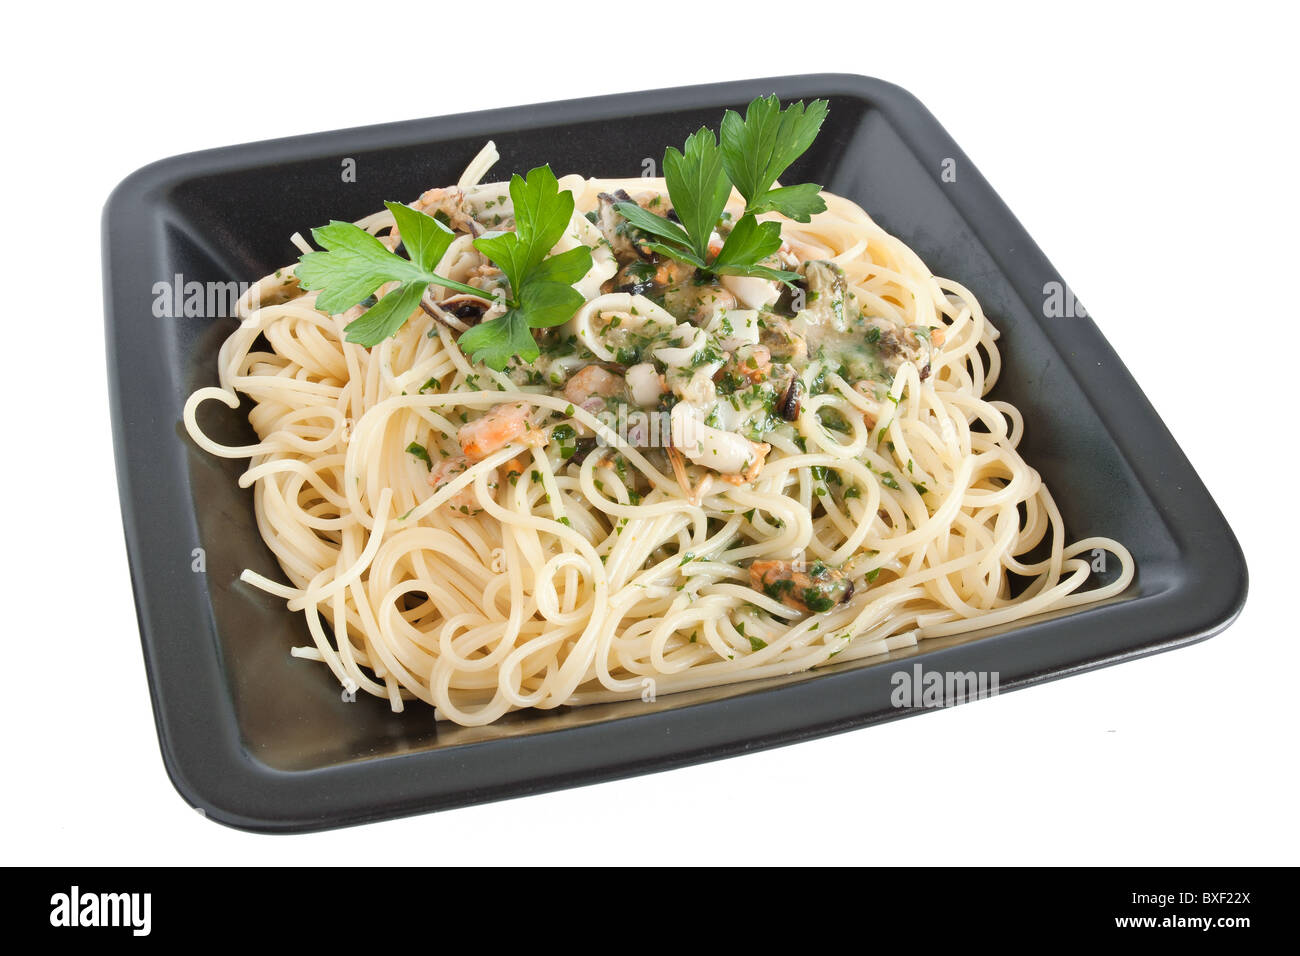 Spaghetti aux crevettes, calamars, moules et persil isolated on white with clipping path Banque D'Images